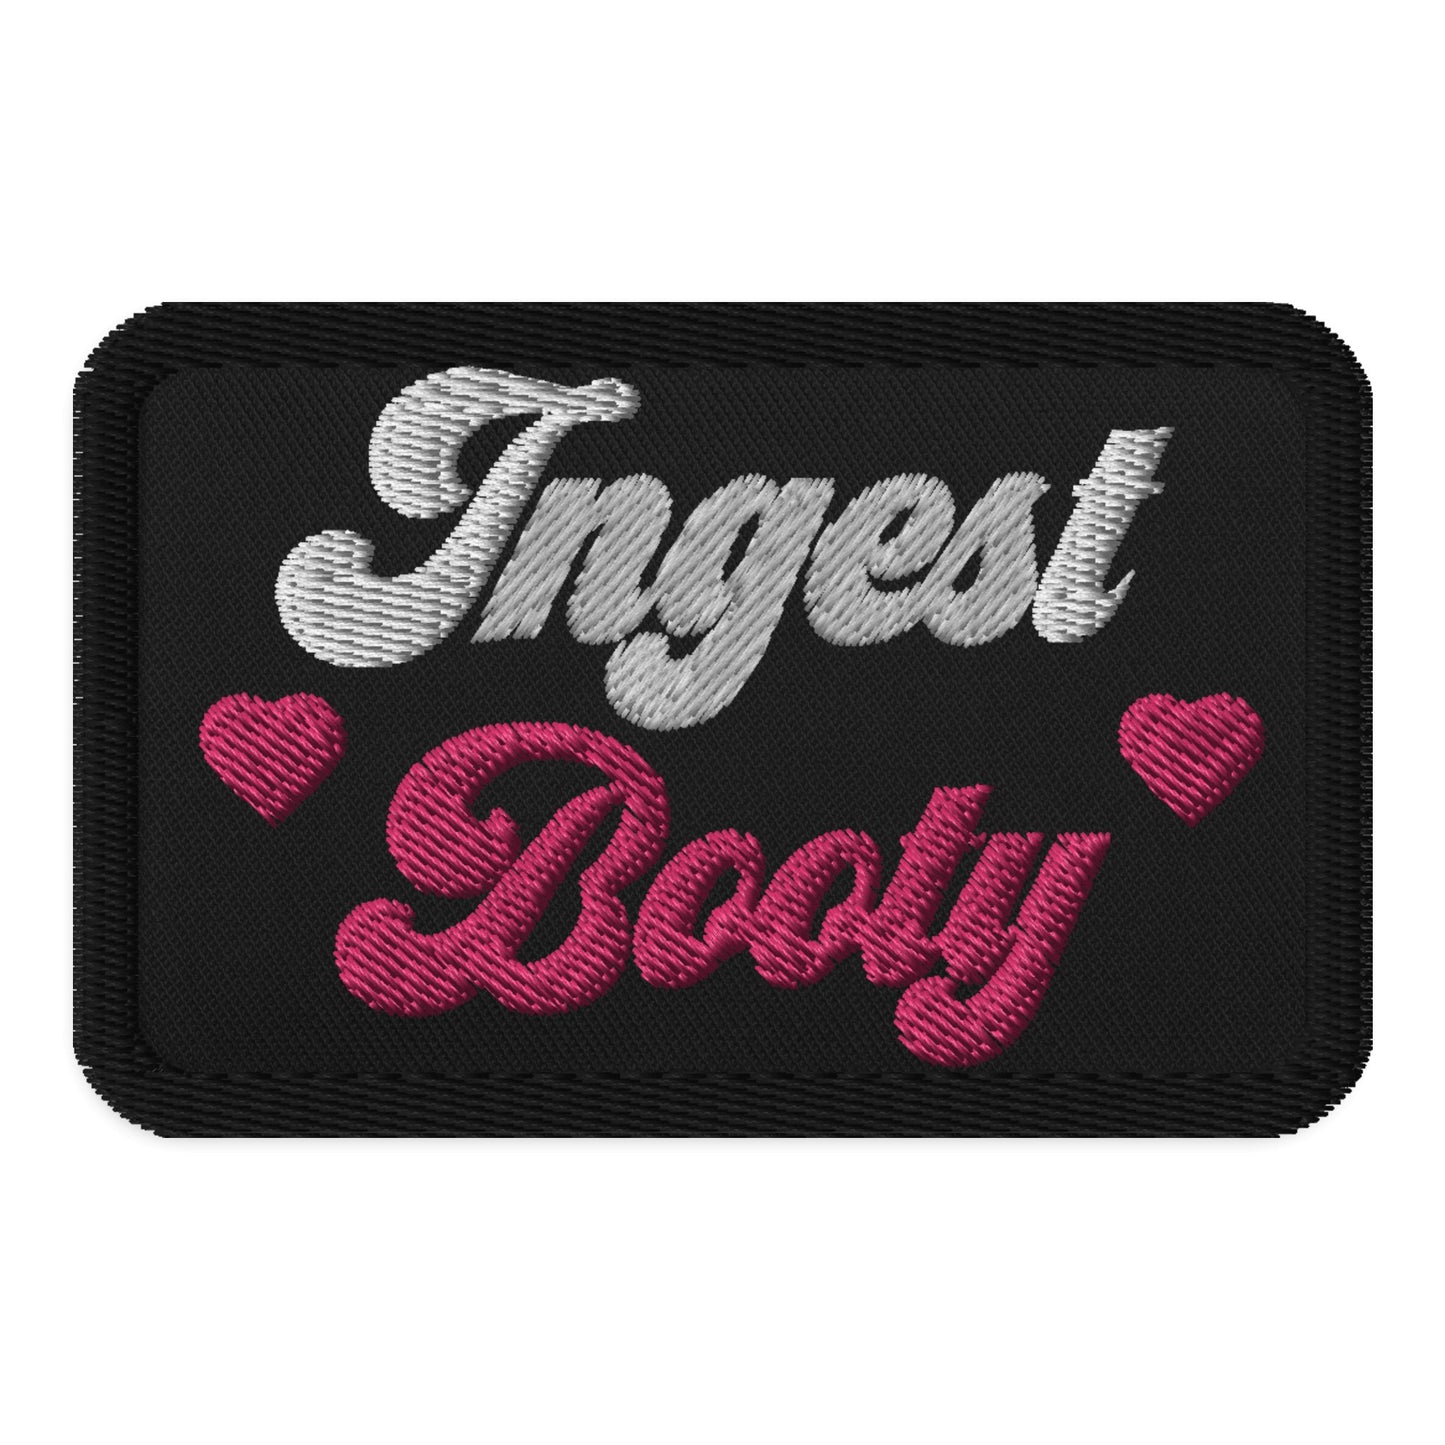 Artsy Patches: Ingest Booty - Red Pawn Shop